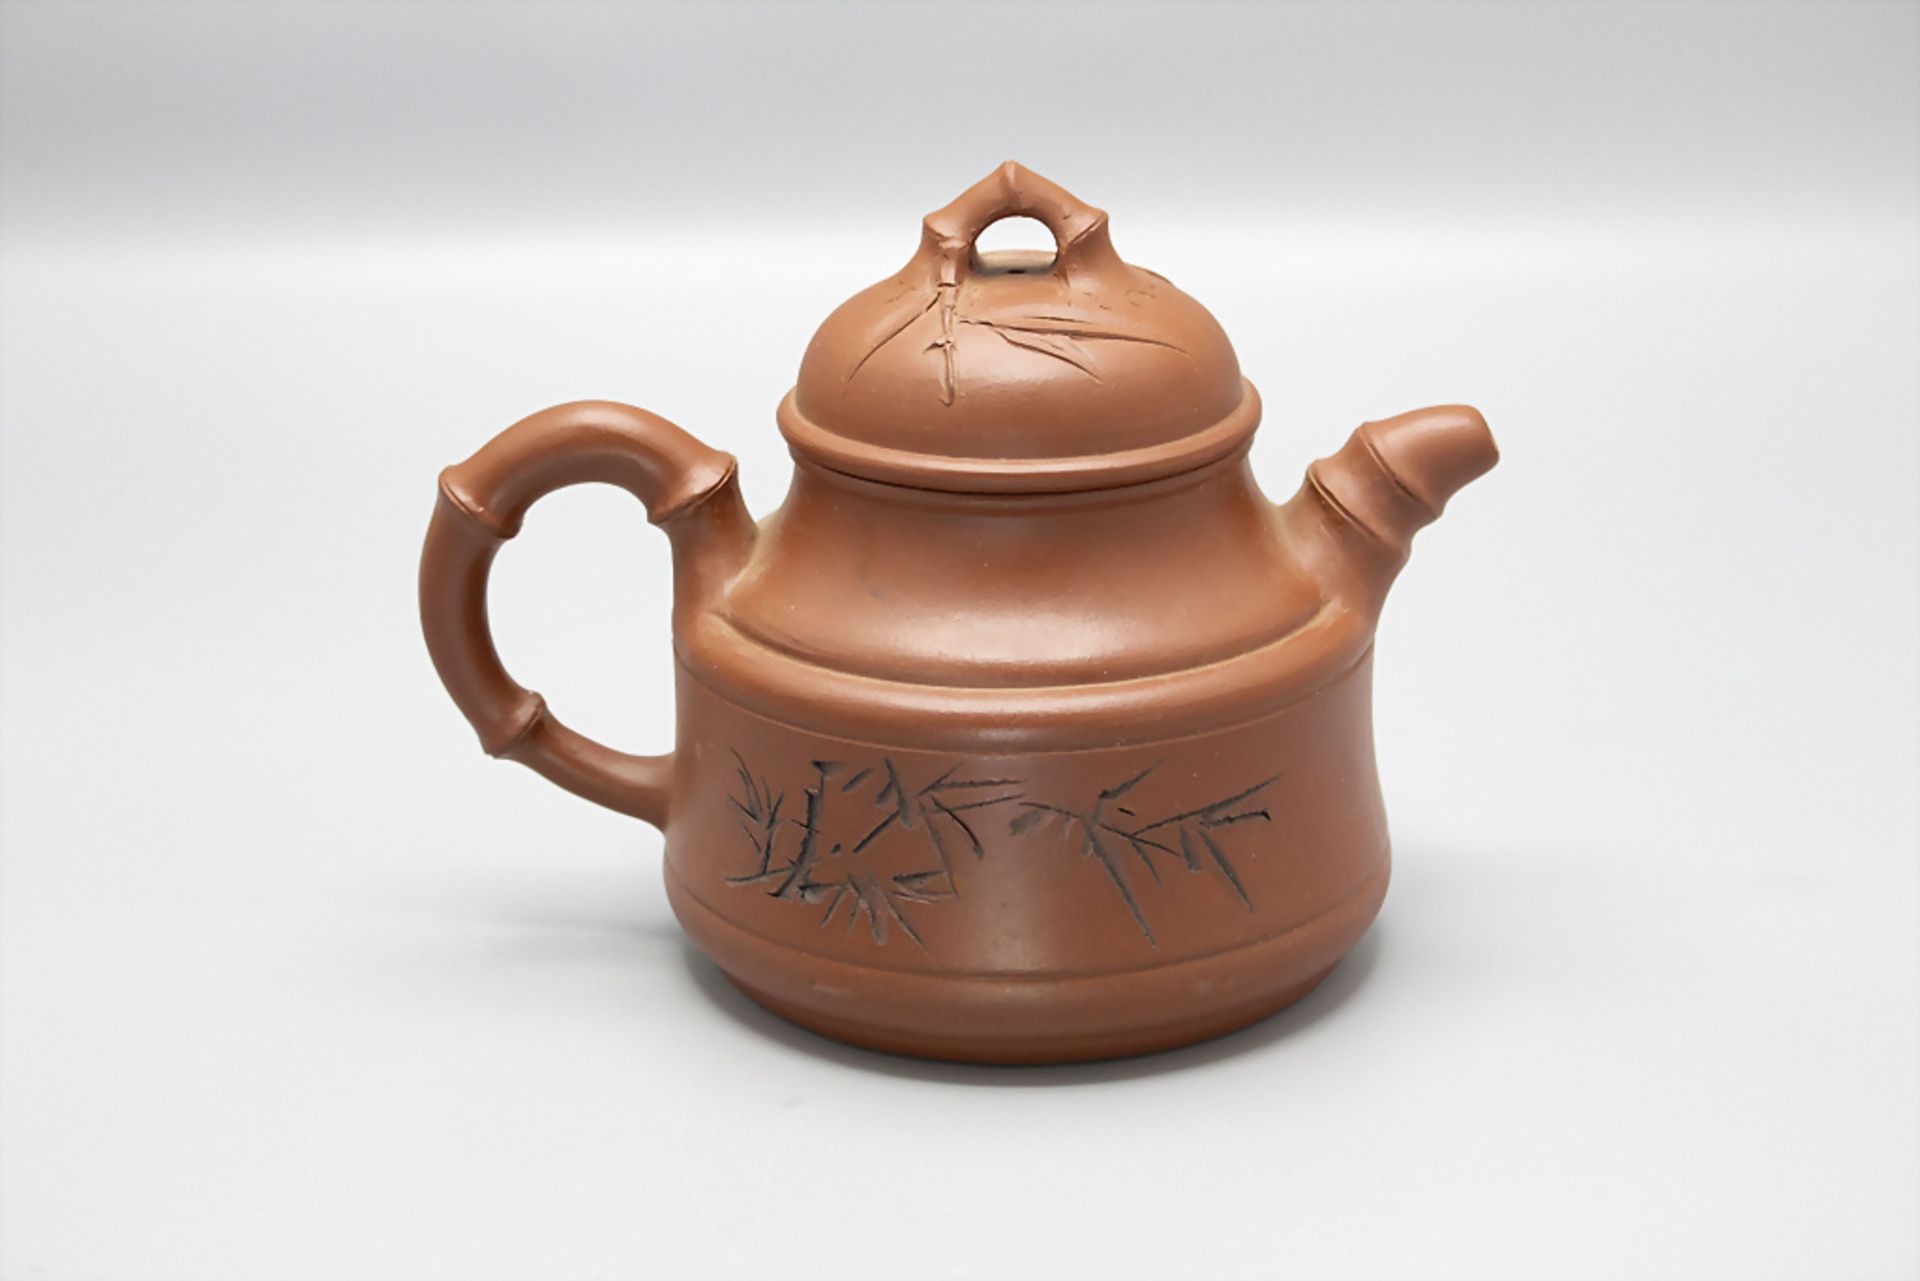 Bambus Teekanne mit Inschrift / A bamboo teapot with inscription, China, um 20. Jh. - Image 3 of 8